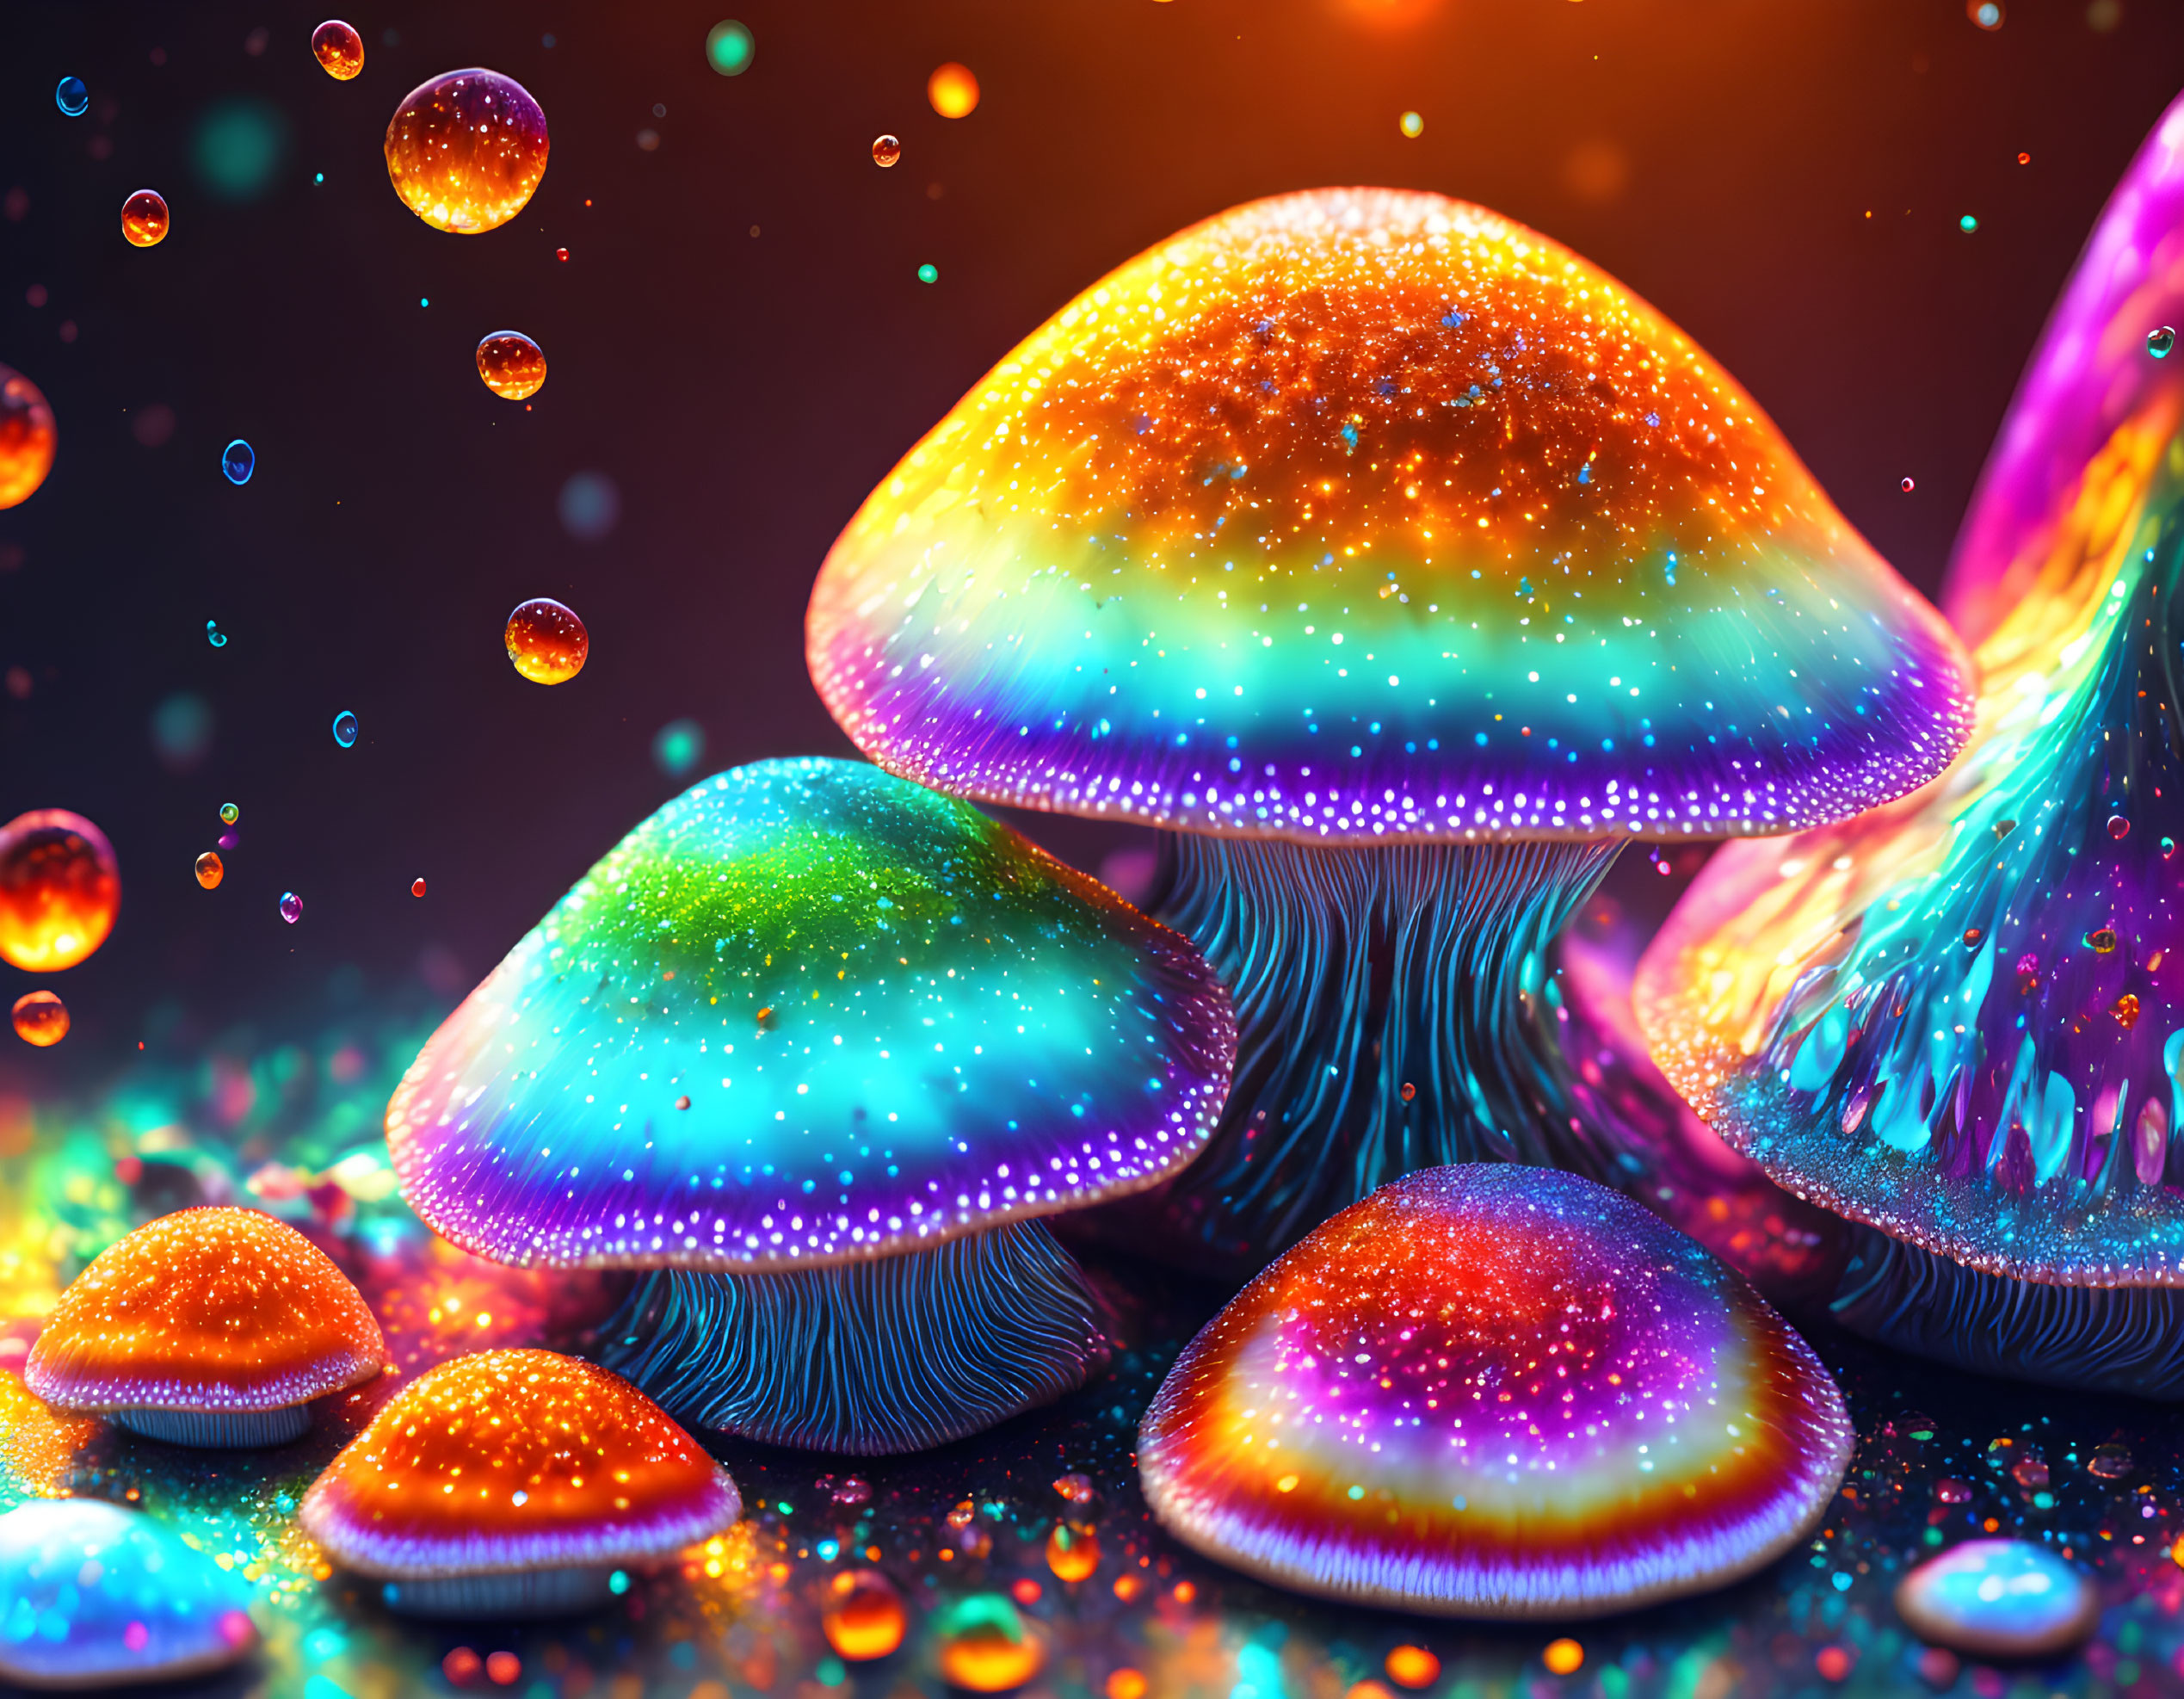 Neon-colored mushrooms with glowing caps and intricate gill patterns on dark background